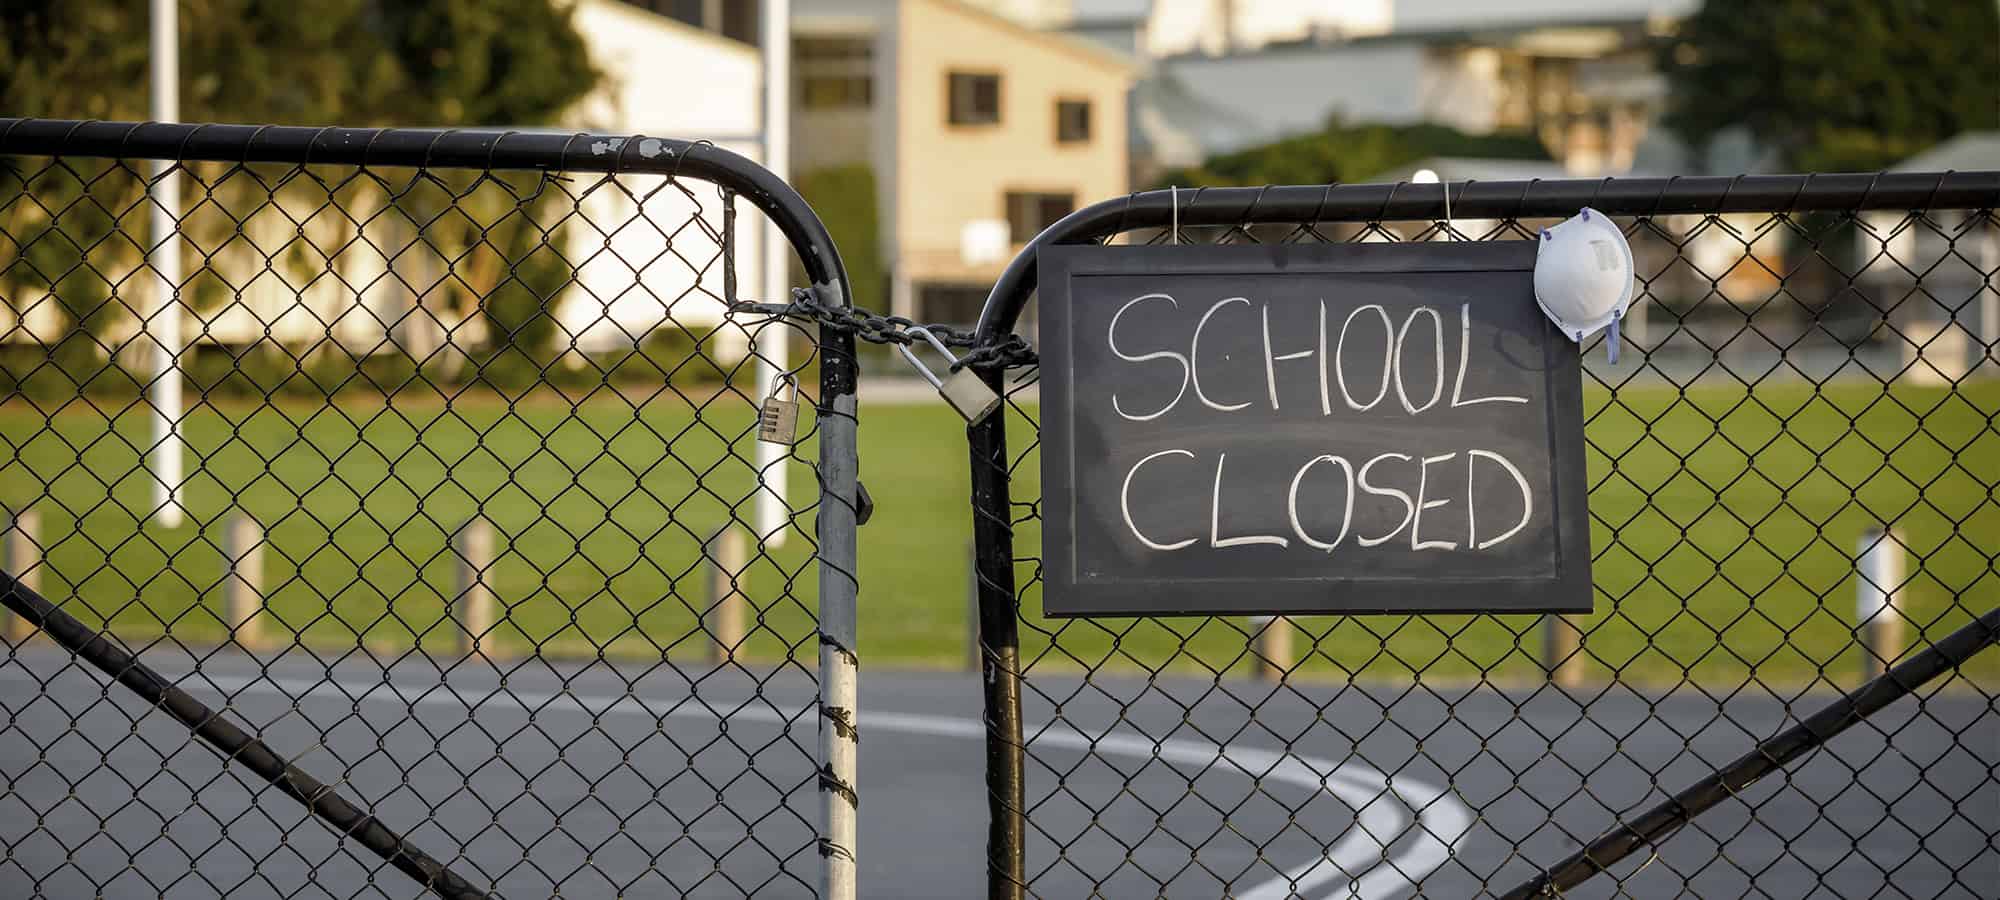 school gates closed with 'school closed sign' and mask due to crazy year of 2020 and coronavirus